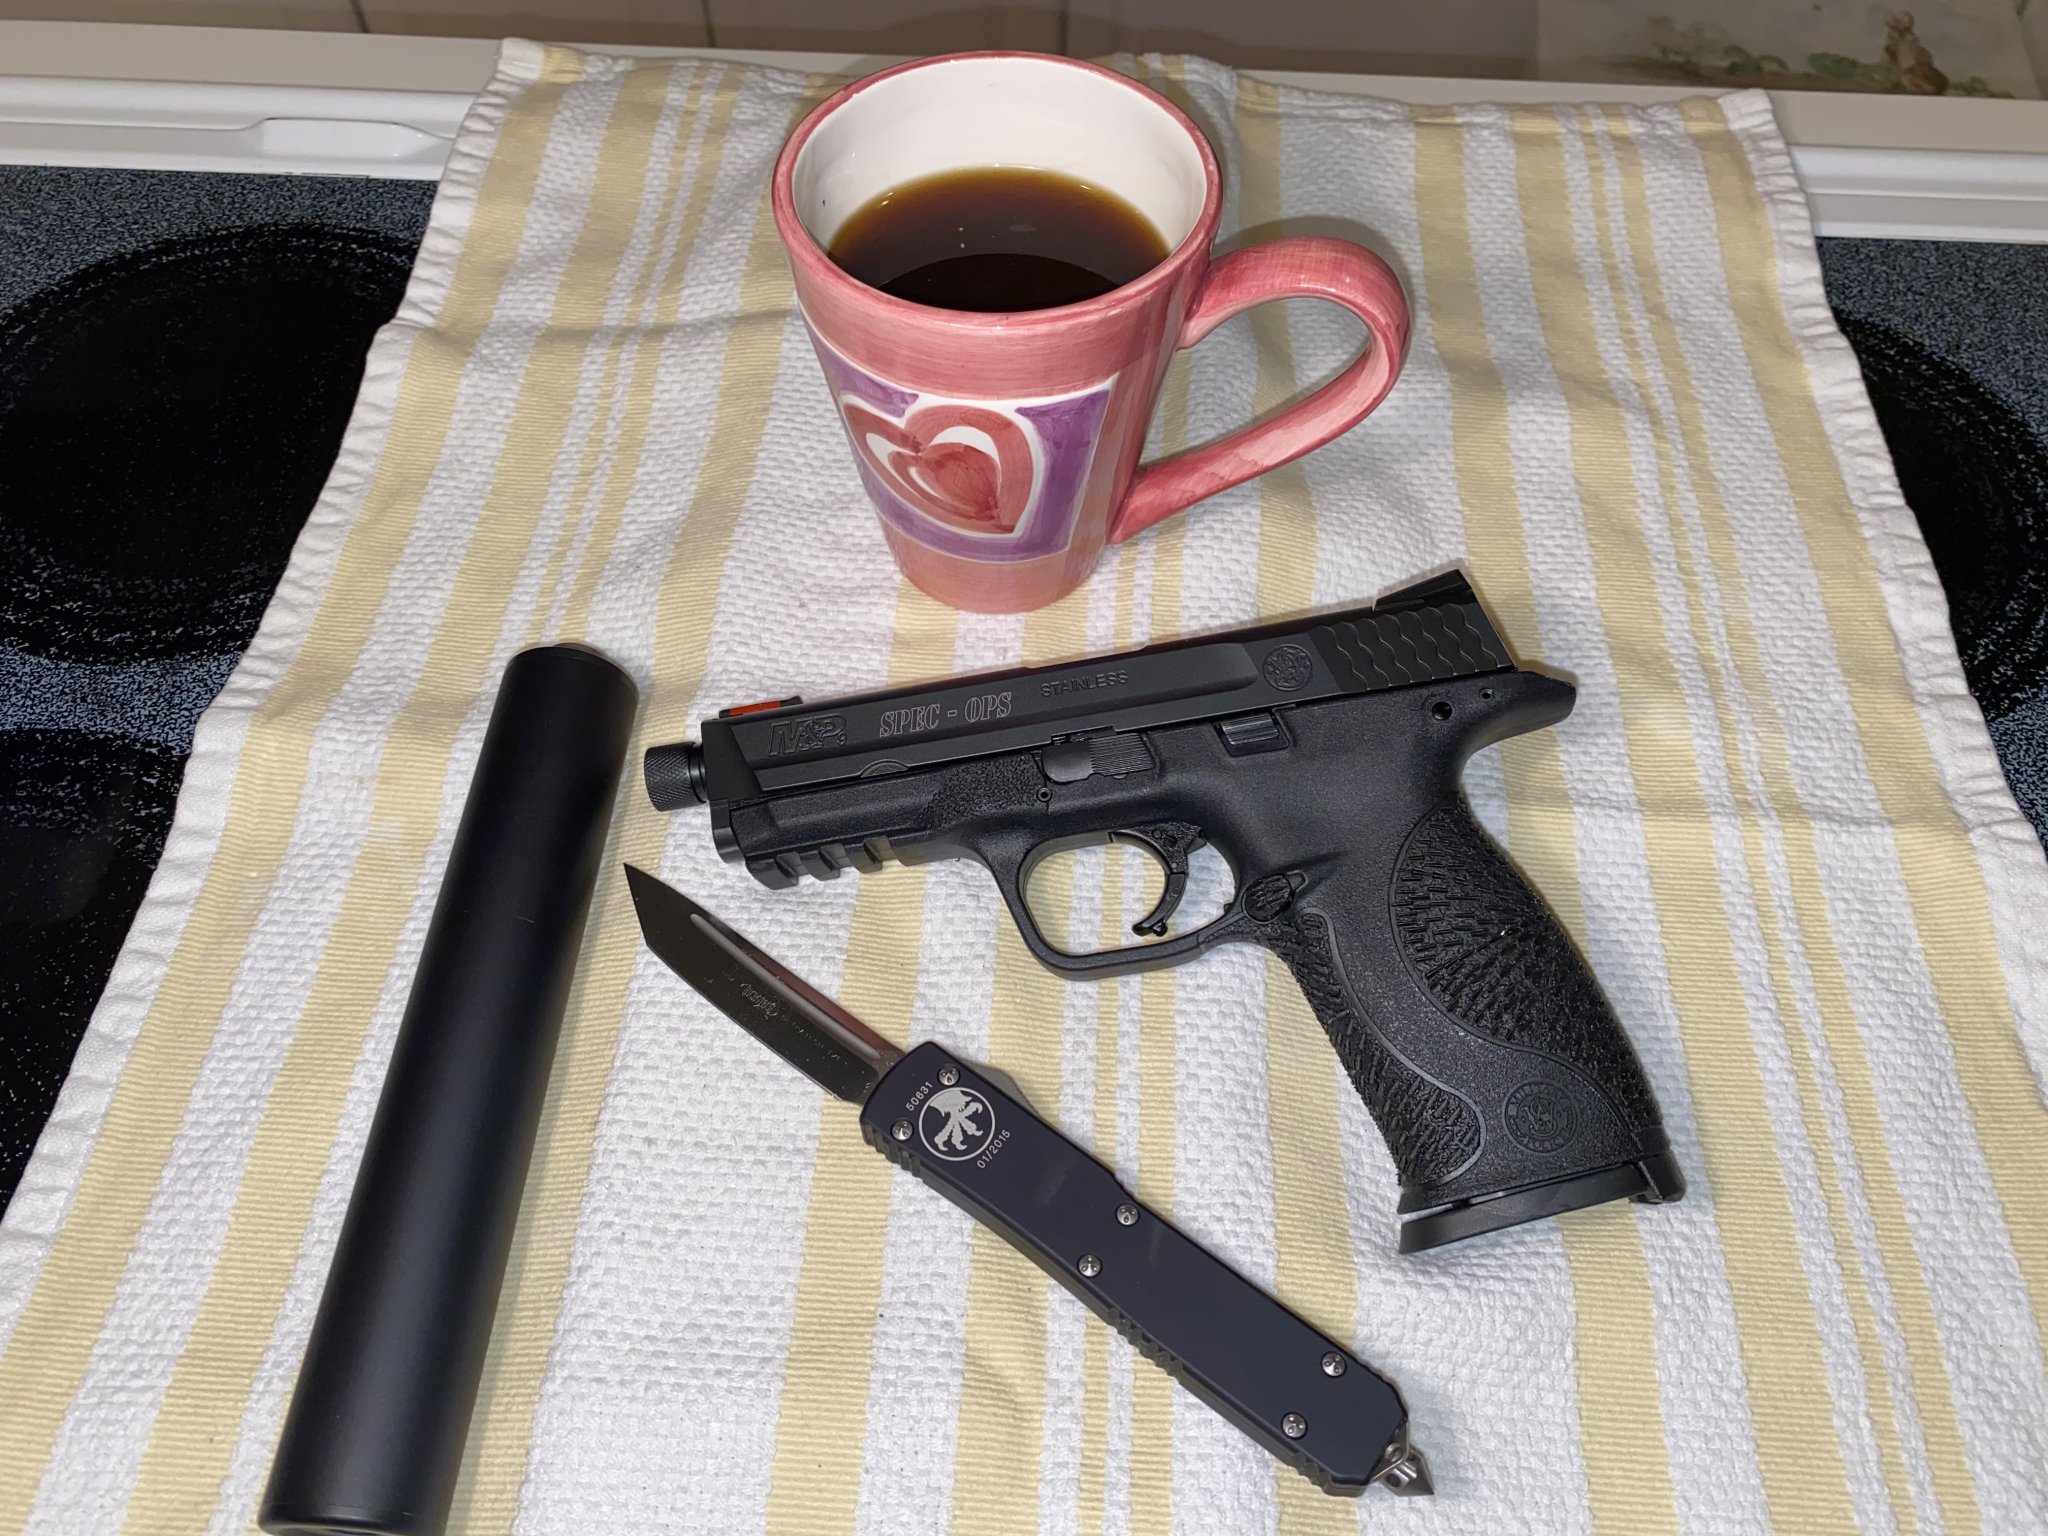 Smith & Wesson M&P9 SpecOps 9 mm with Coffee Photos 2020IMG_7229 copy.jpg